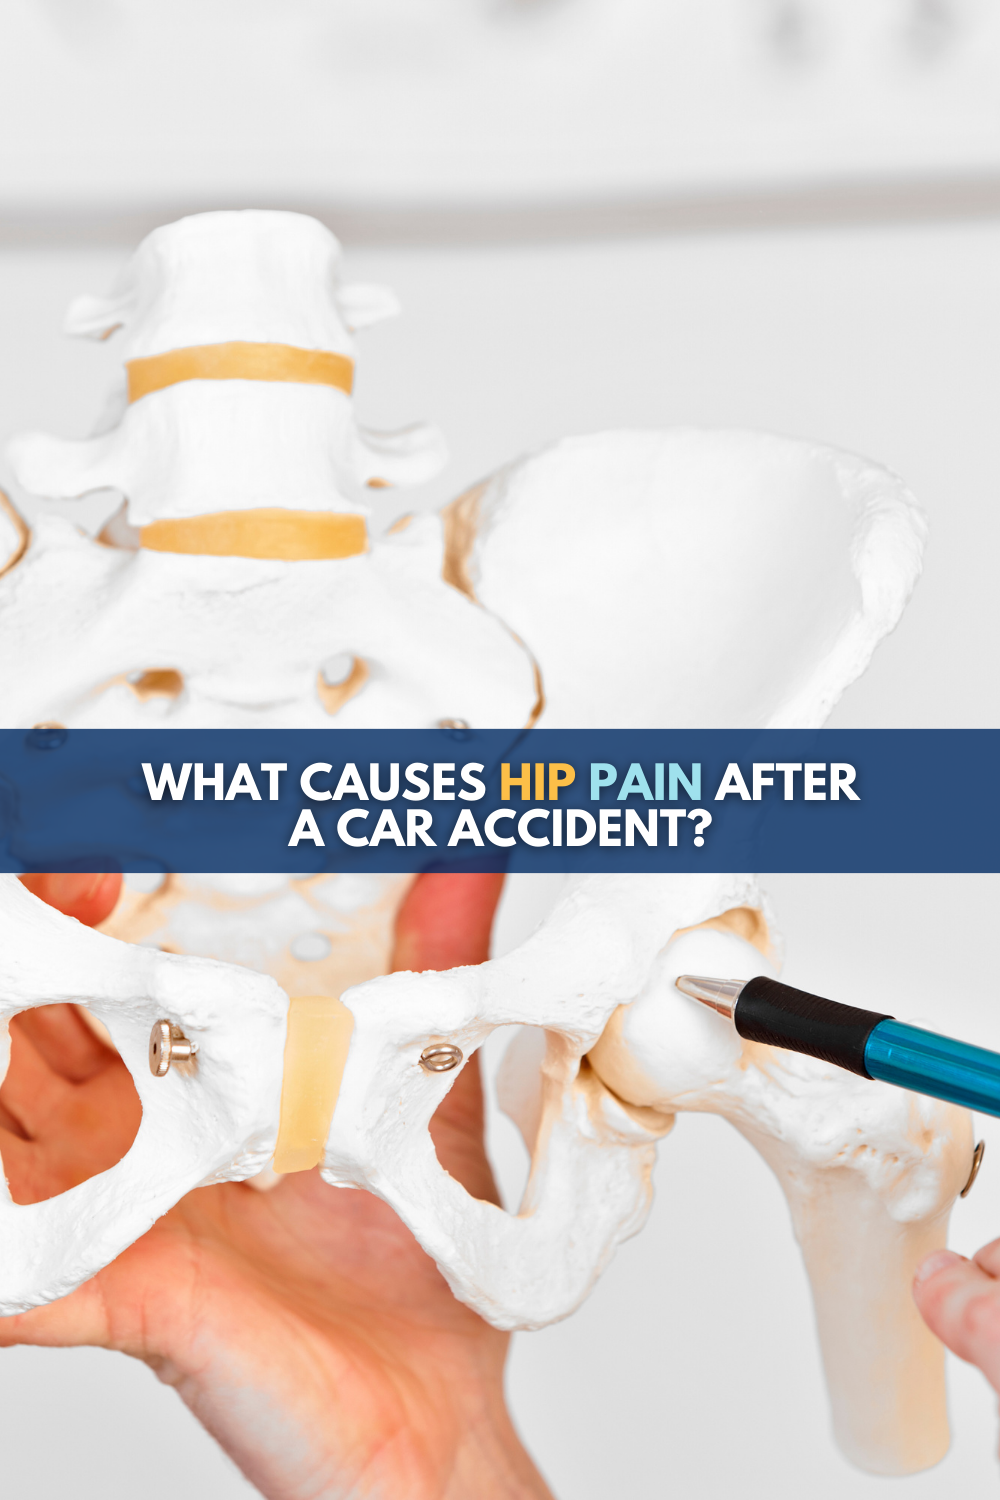 Hip Pain After Car Accident: Causes and What To Do